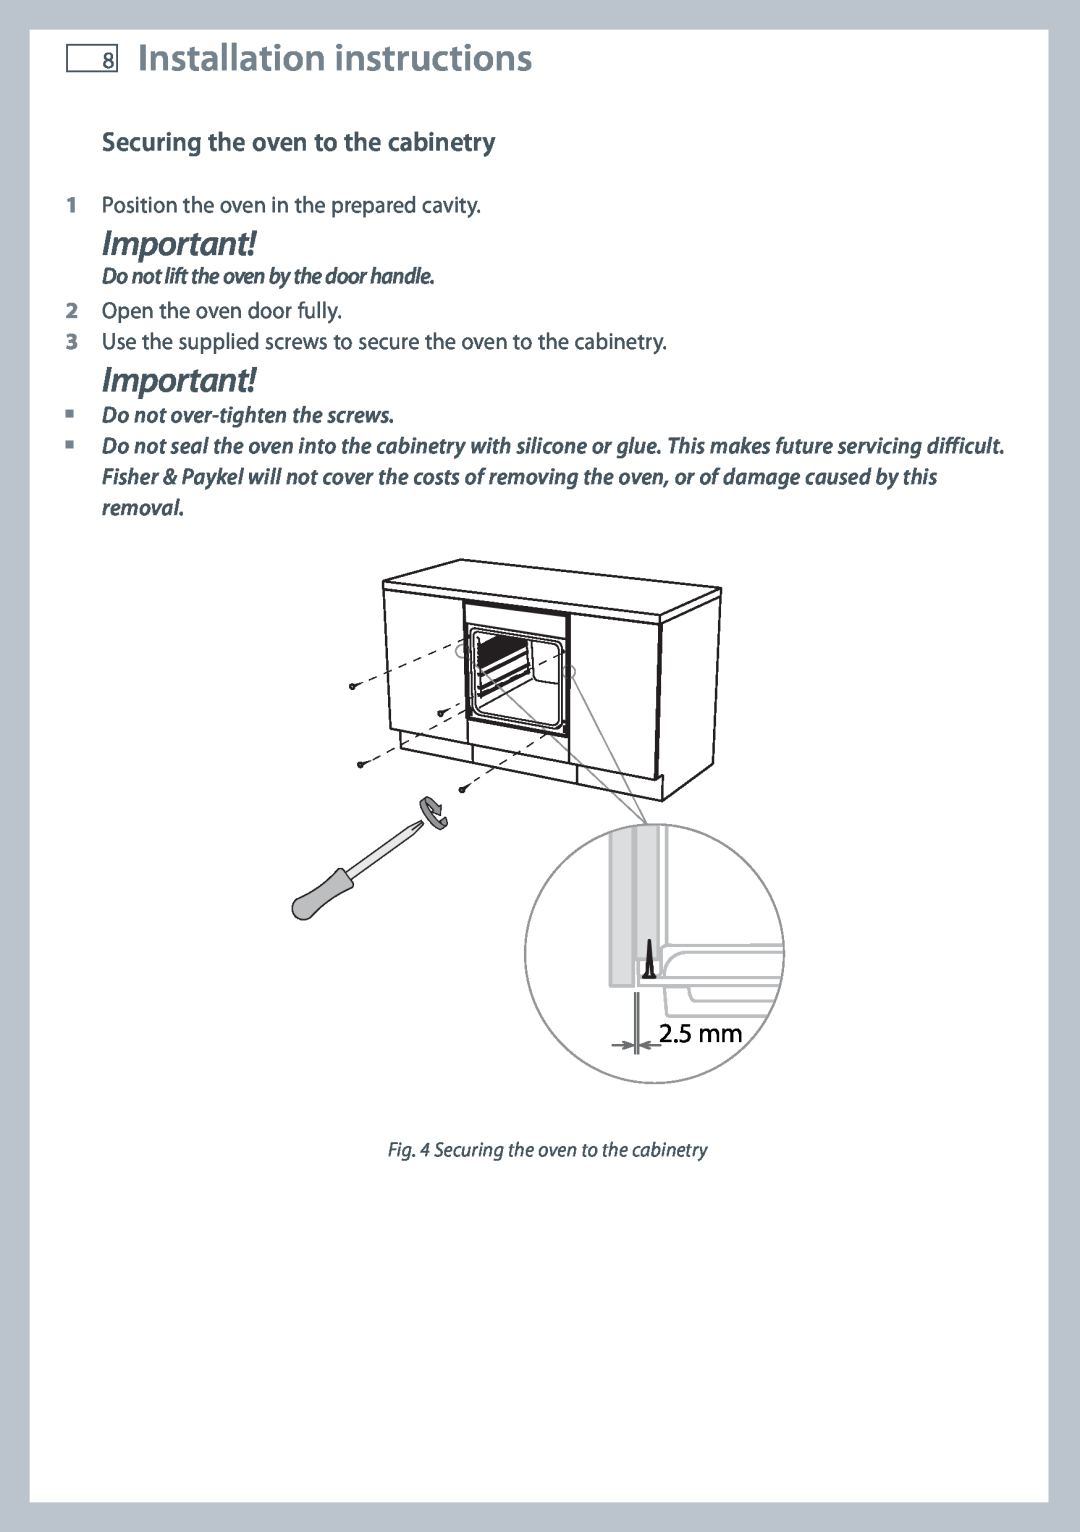 Fisher & Paykel OB60S9DEP, OB60S9DECP Installation instructions, Securing the oven to the cabinetry, 2.5 mm 